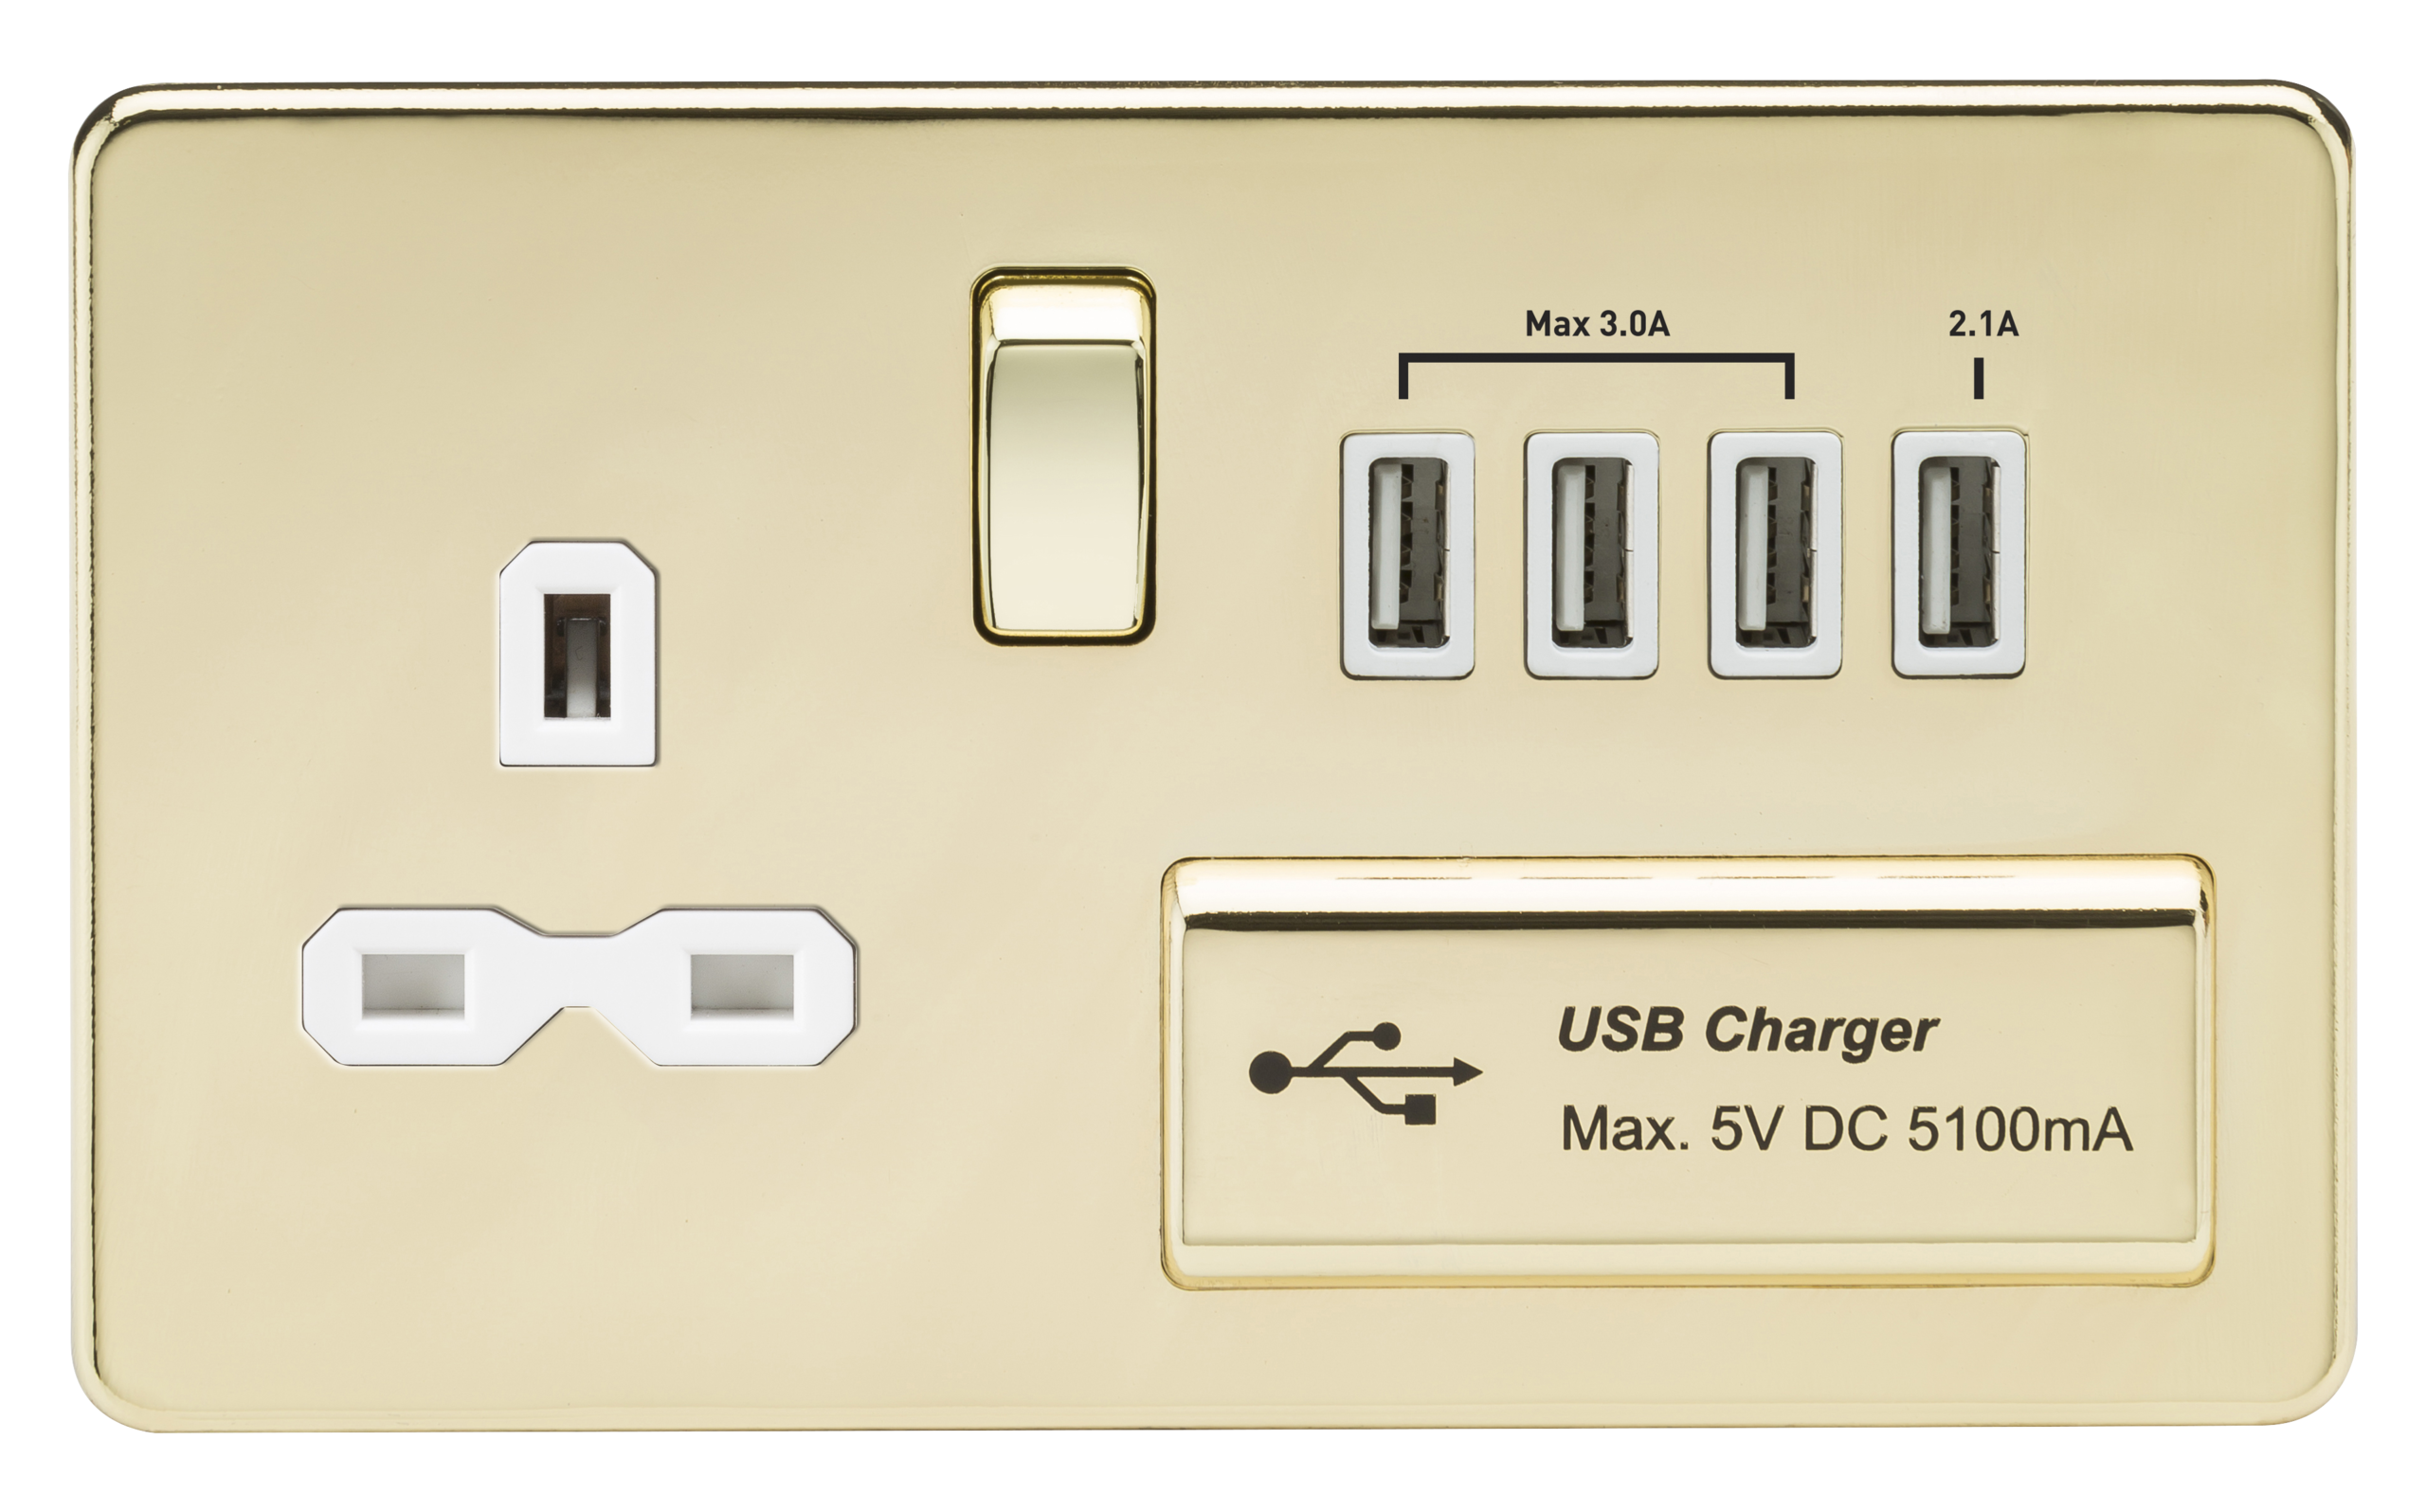 Screwless 13A Switched Socket With Quad USB Charger (5.1A) - Polished Brass With White Insert - SFR7USB4PBW 